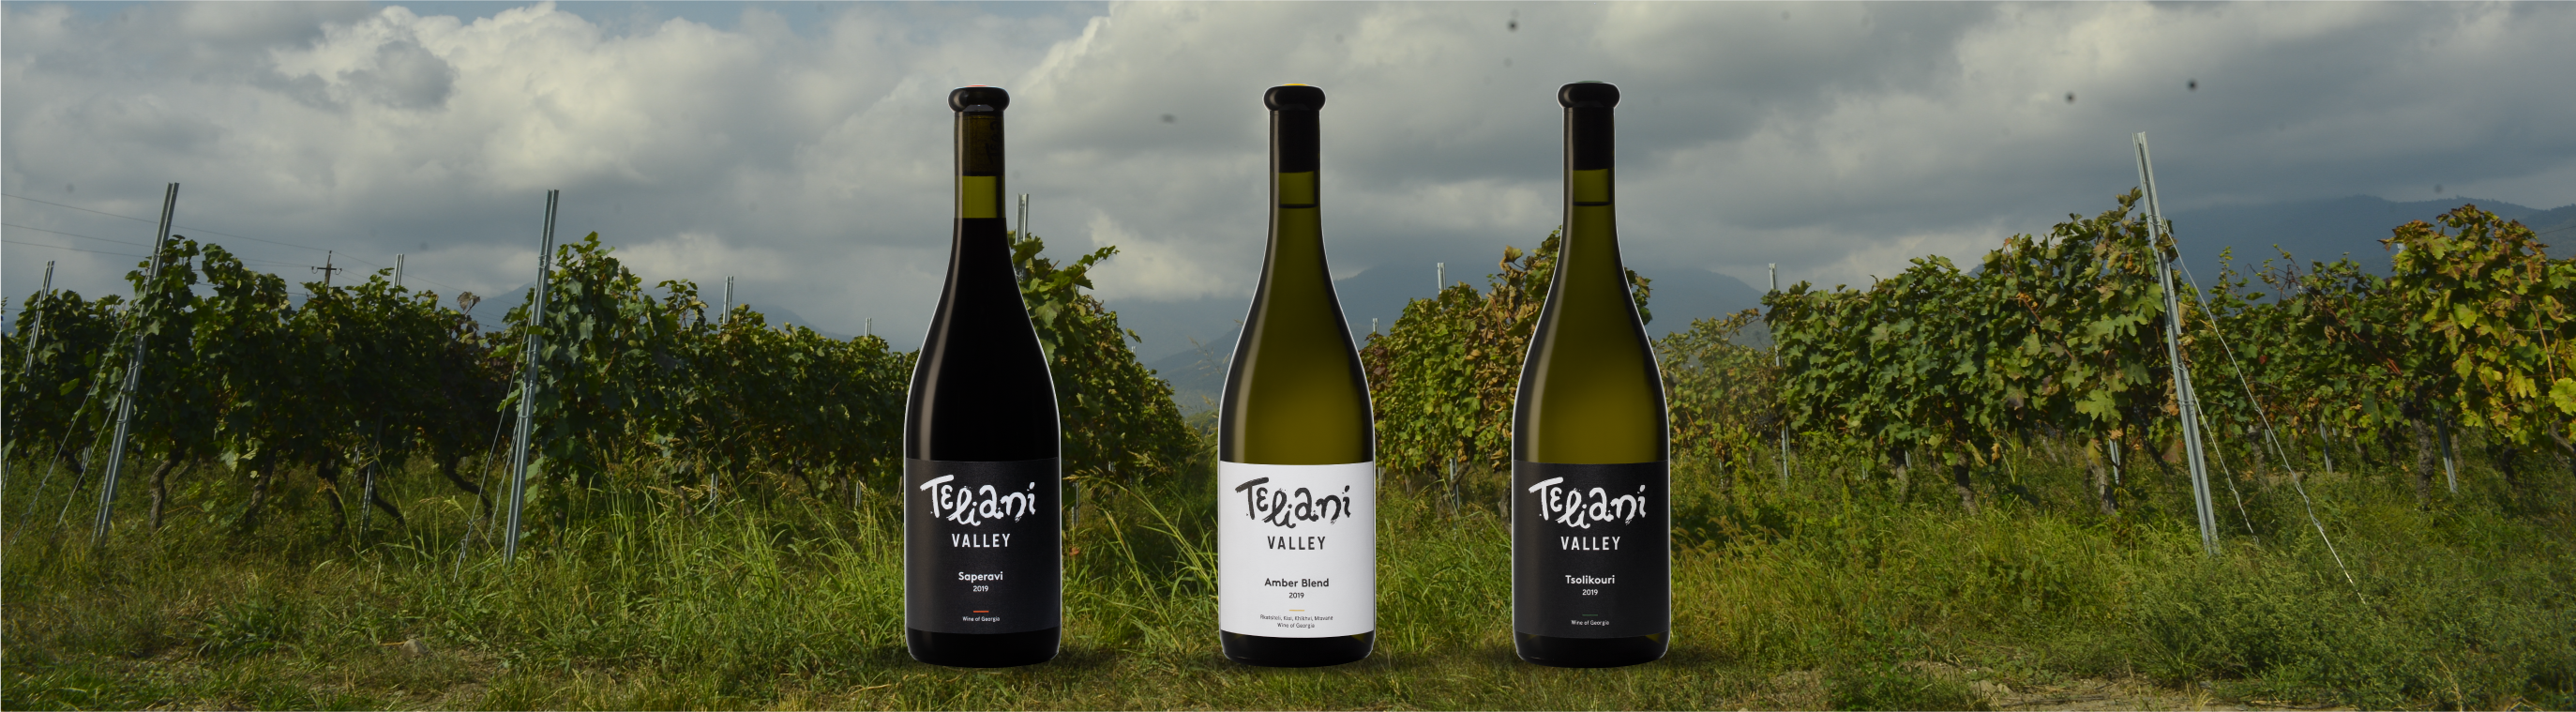 Teliani Valley is launching new wines in the US